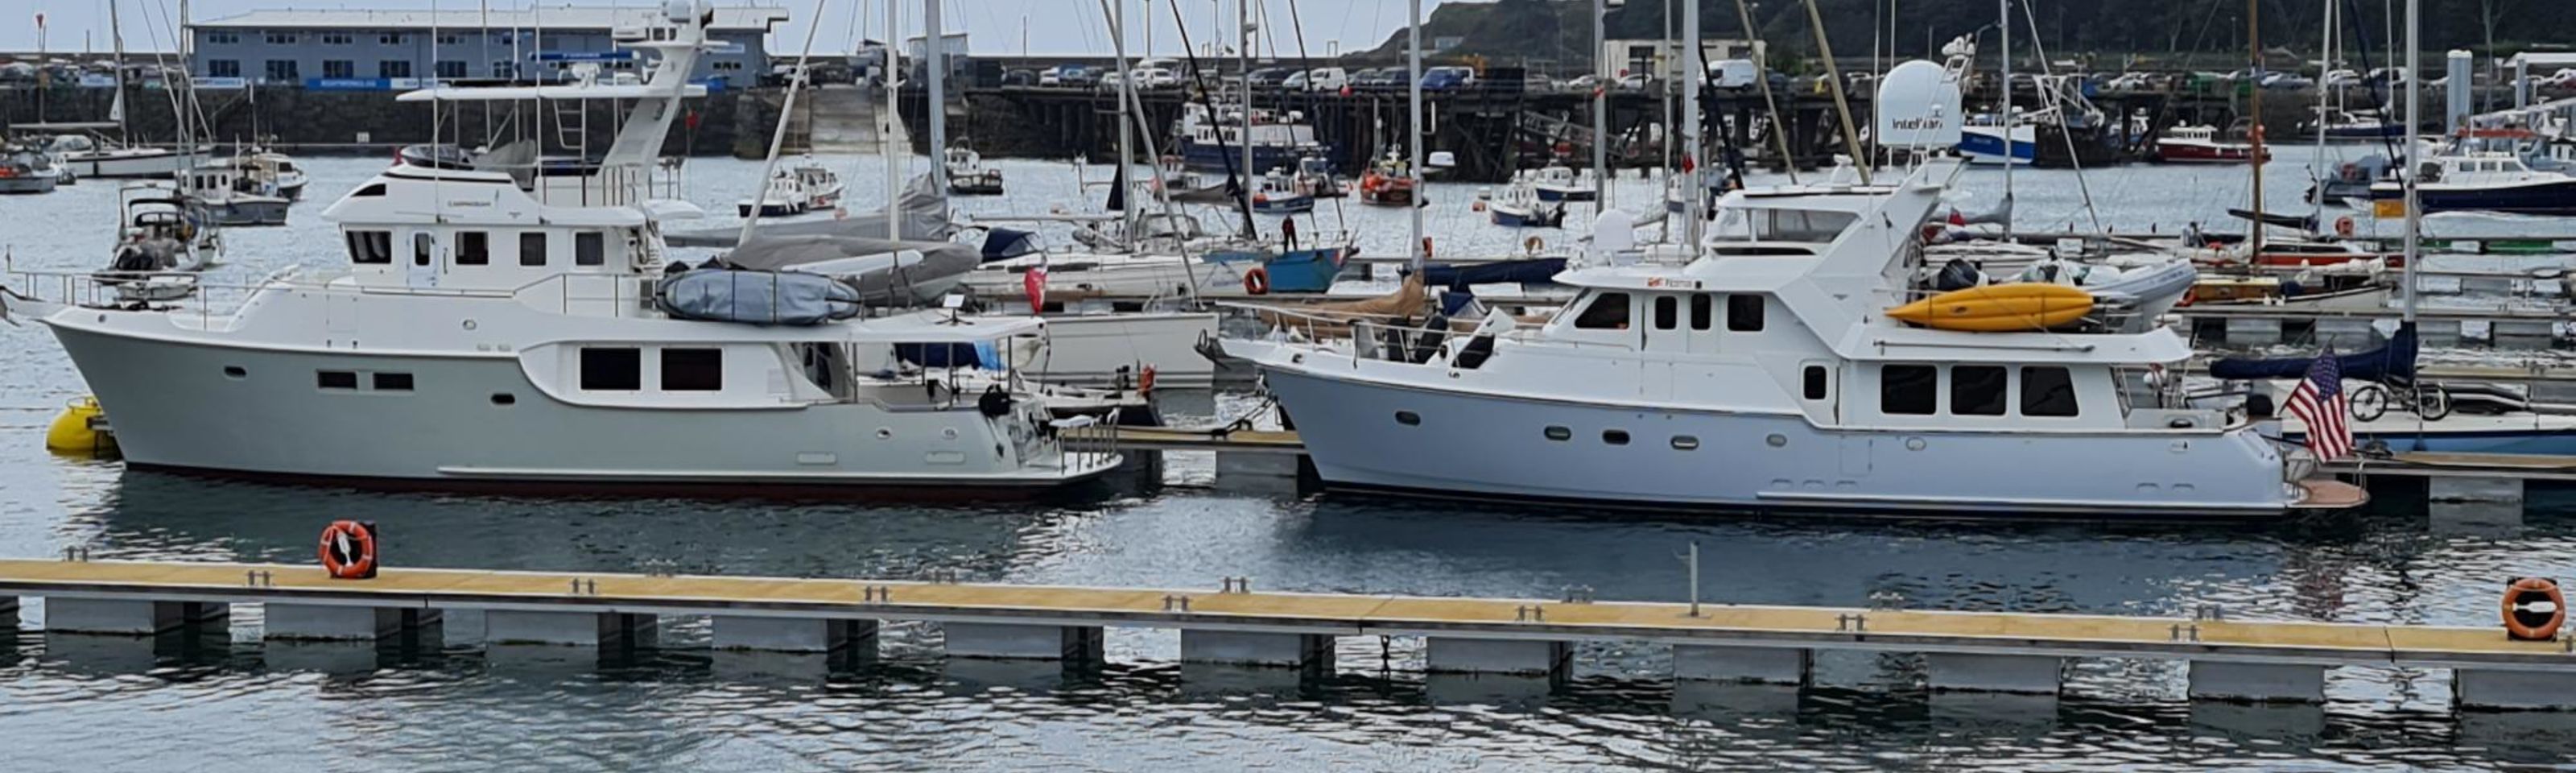 Bachmann Welcomes Visiting Yachts to Guernsey